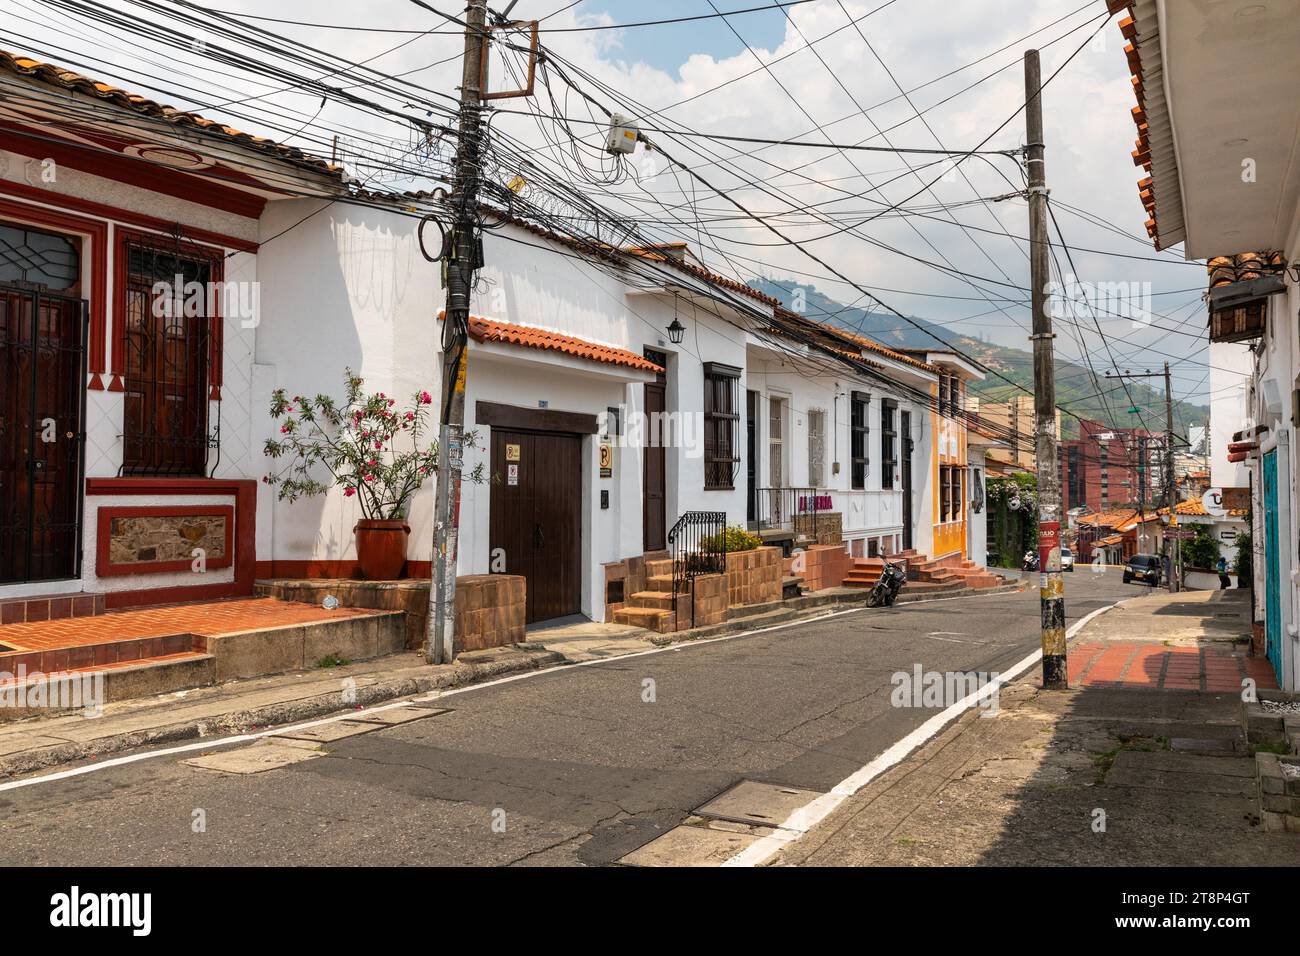 Old town houses with many power lines, Cali, Valle de Cauca, Colombia Stock Photo